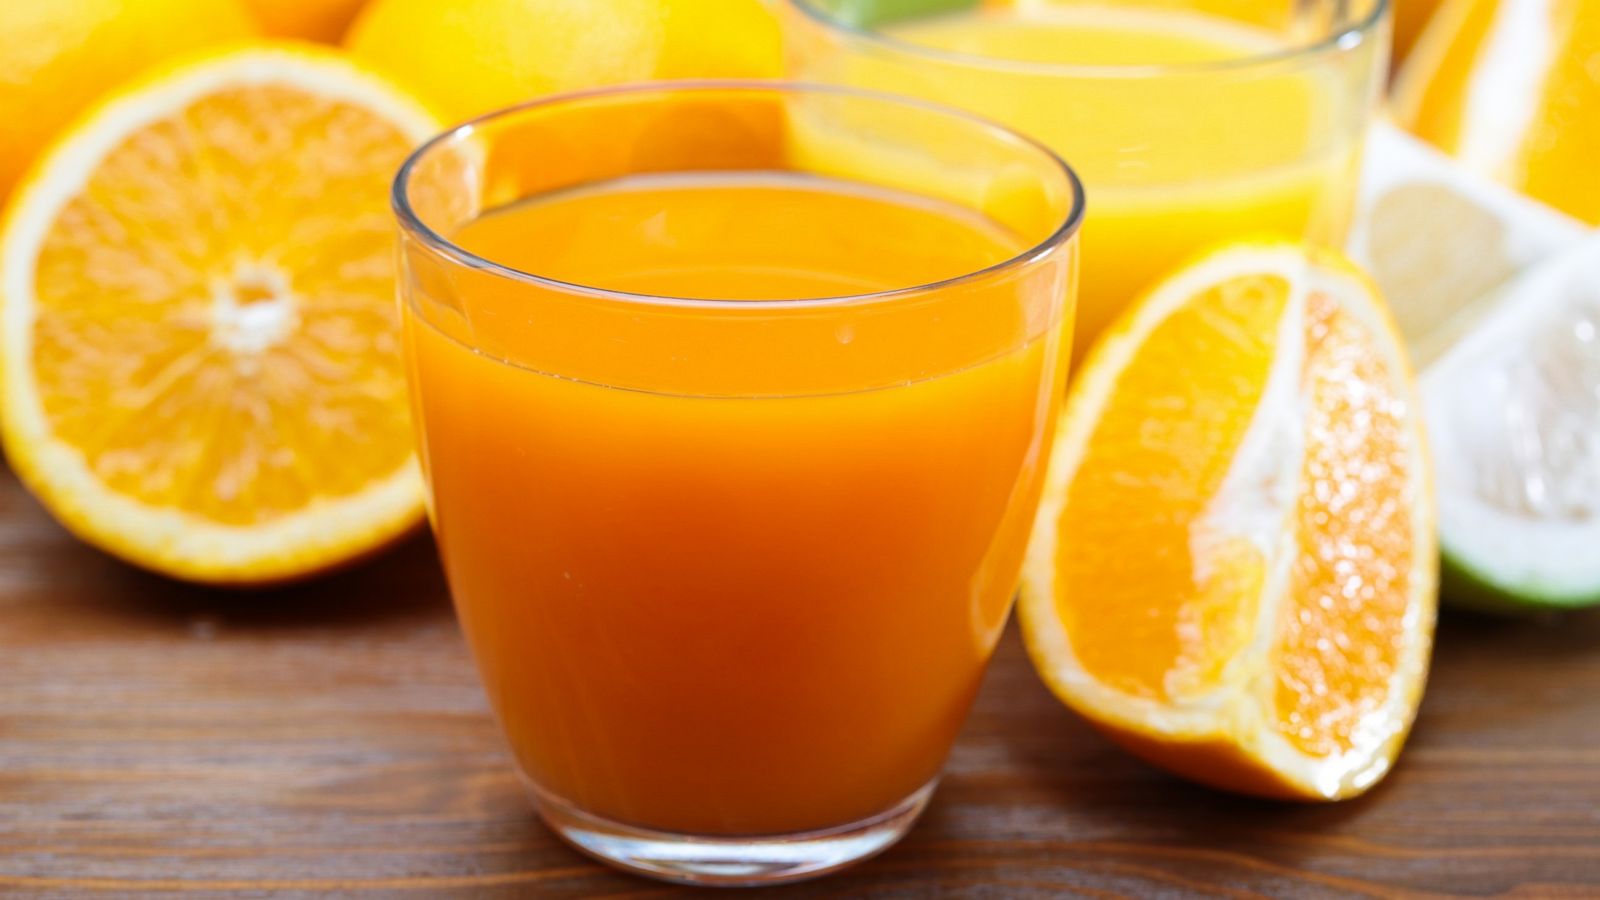 Should You Drink Orange Juice? It Depends On Your Goals - ABC News